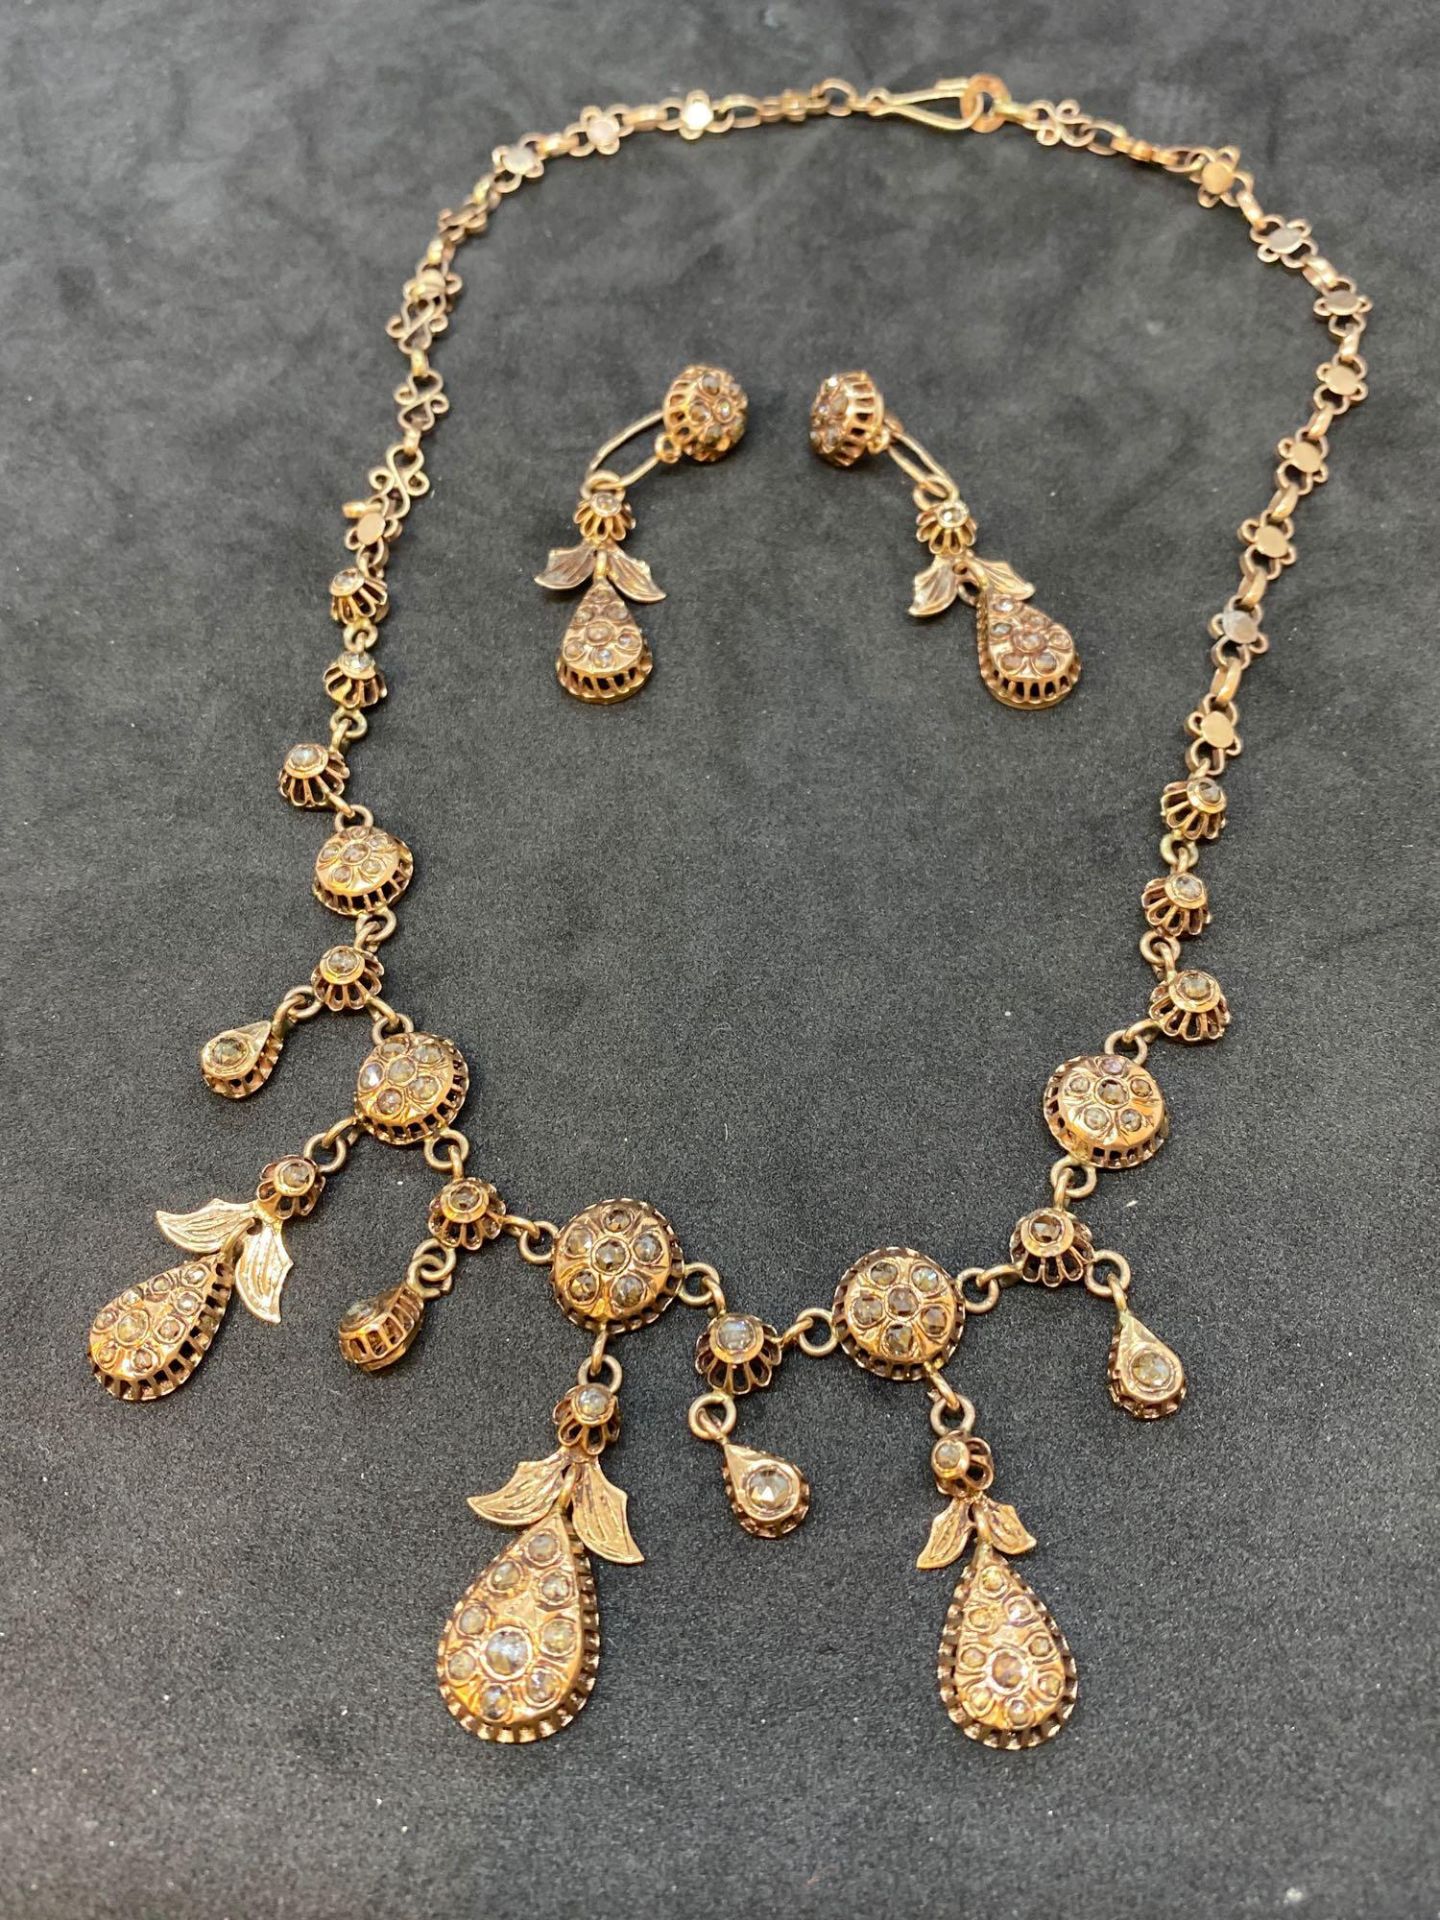 Vintage 6.00ct Approx Rose Cut Diamond Set Necklace and Matching Earrings 9ct Gold - 41 Grams